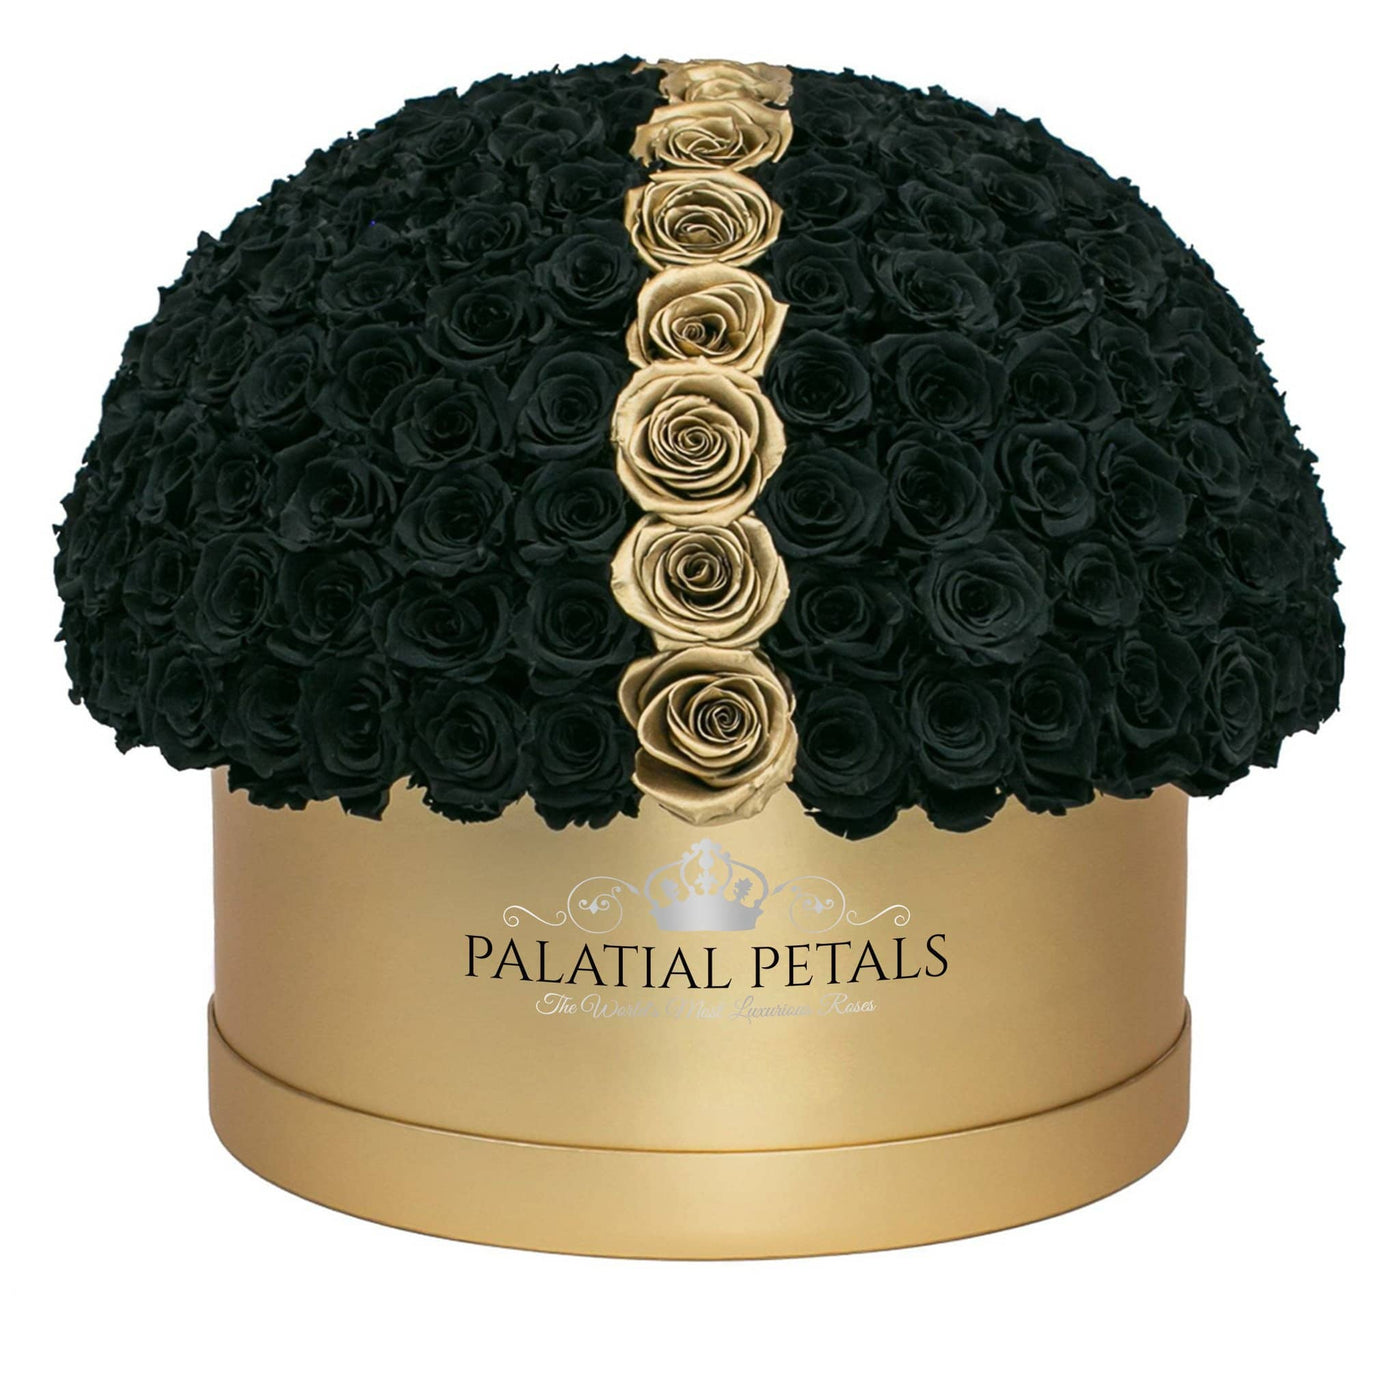 Black & 24K Gold Roses That Last A Year - Deluxe Rose Box